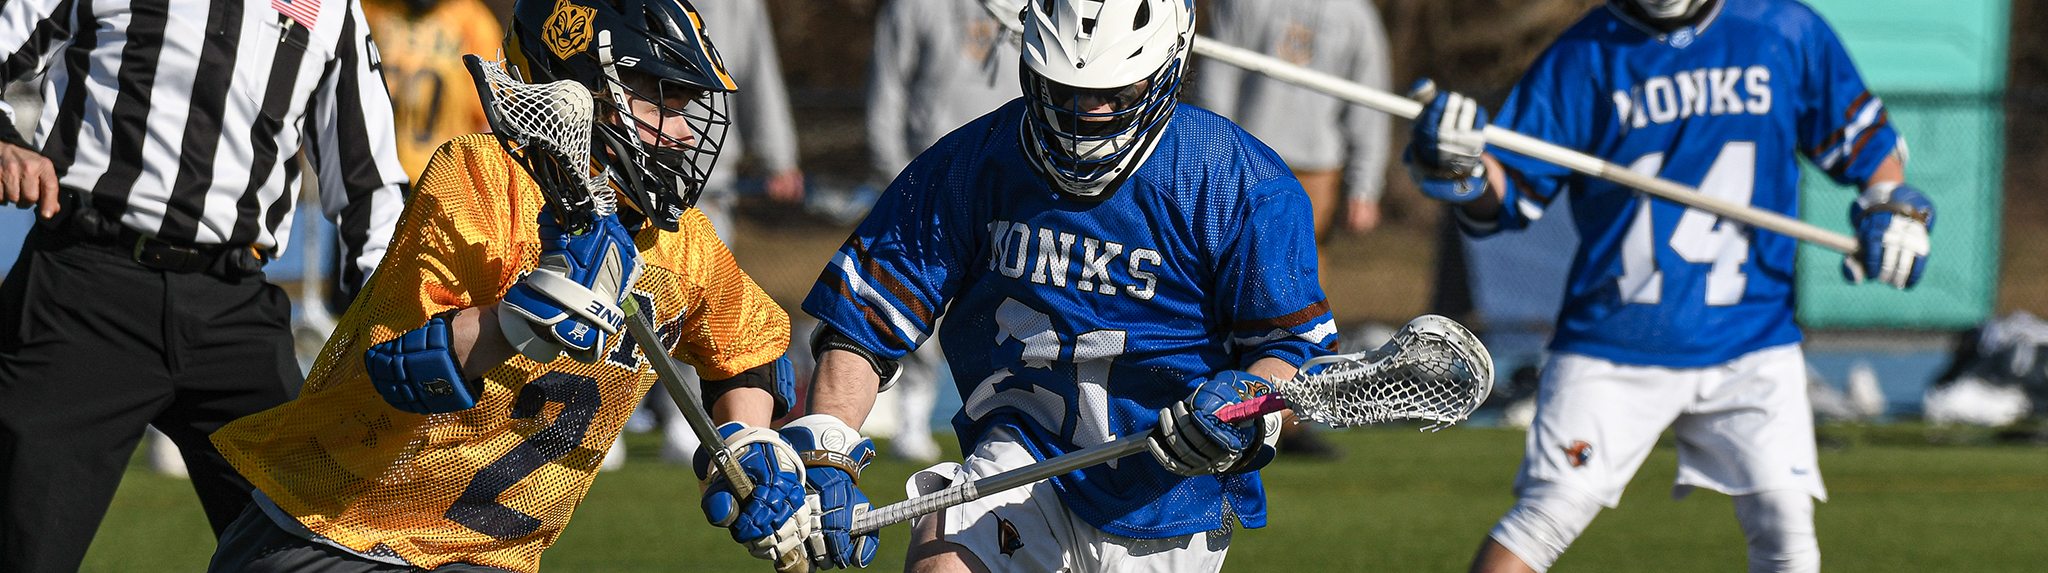 Men's lacrosse players during a game